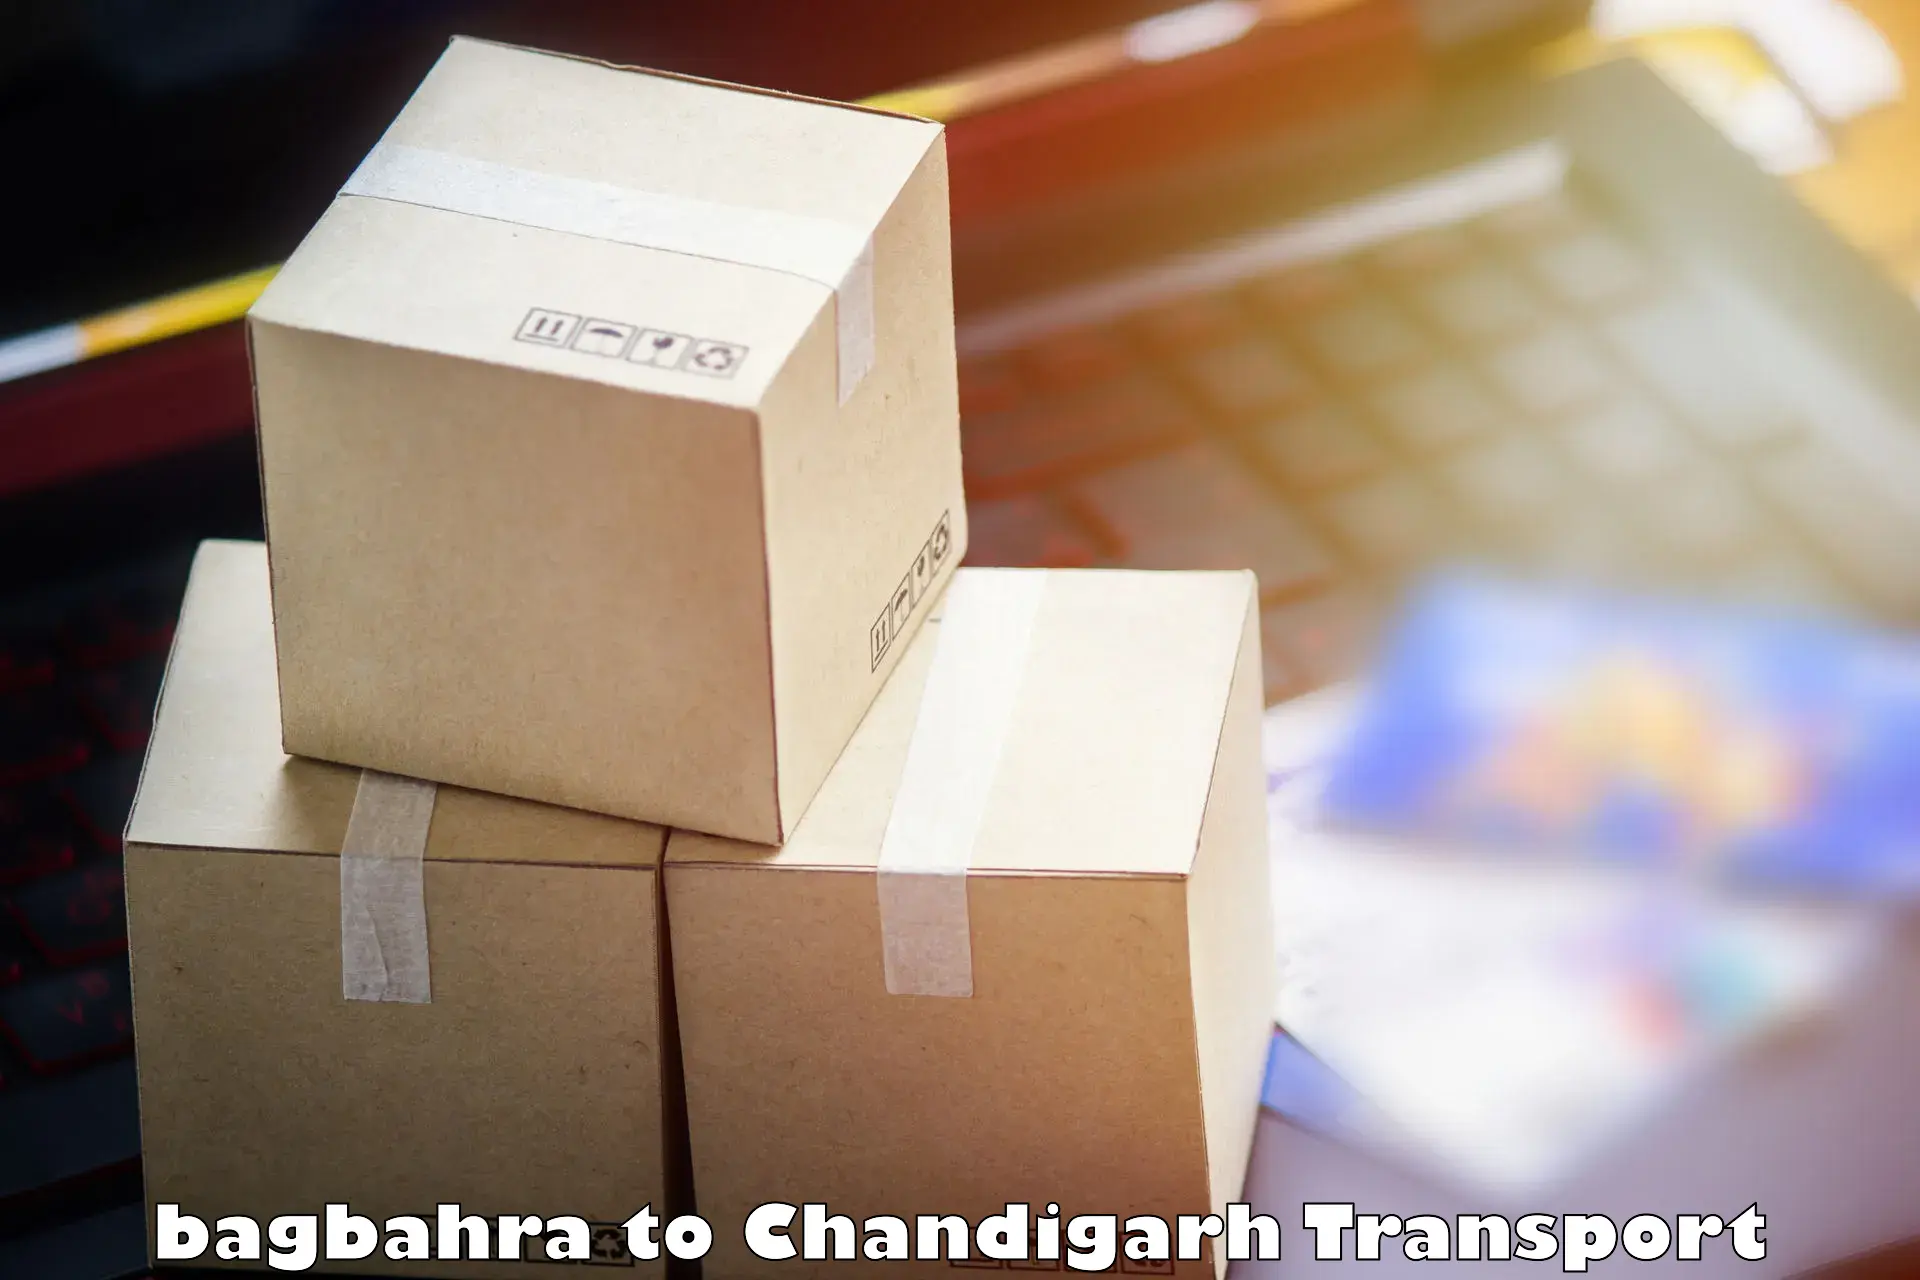 Daily parcel service transport bagbahra to Chandigarh